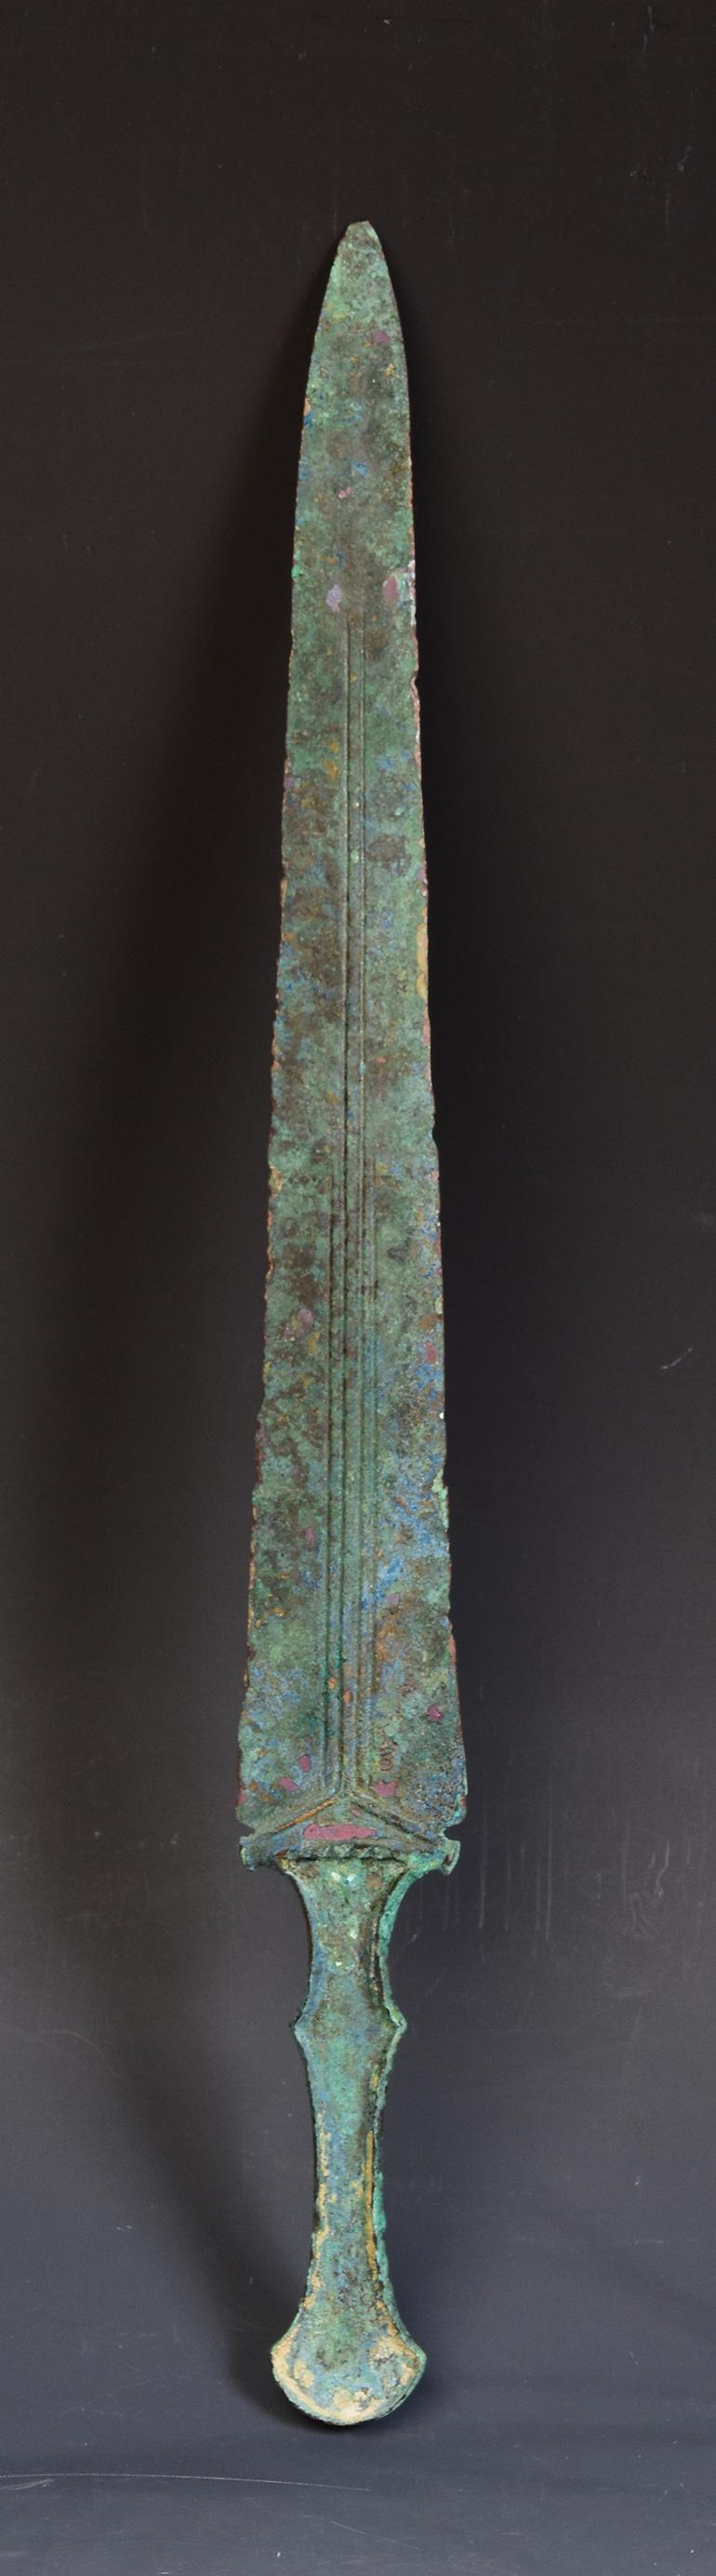 Ancient Luristan bronze short sword with magnificent blue-turquoise green patina.

Luristan bronze comes from the province of Lorestan, a region of nowadays Western Iran in the Zagros Mountains.  With its rich and long history, Luristan culture is